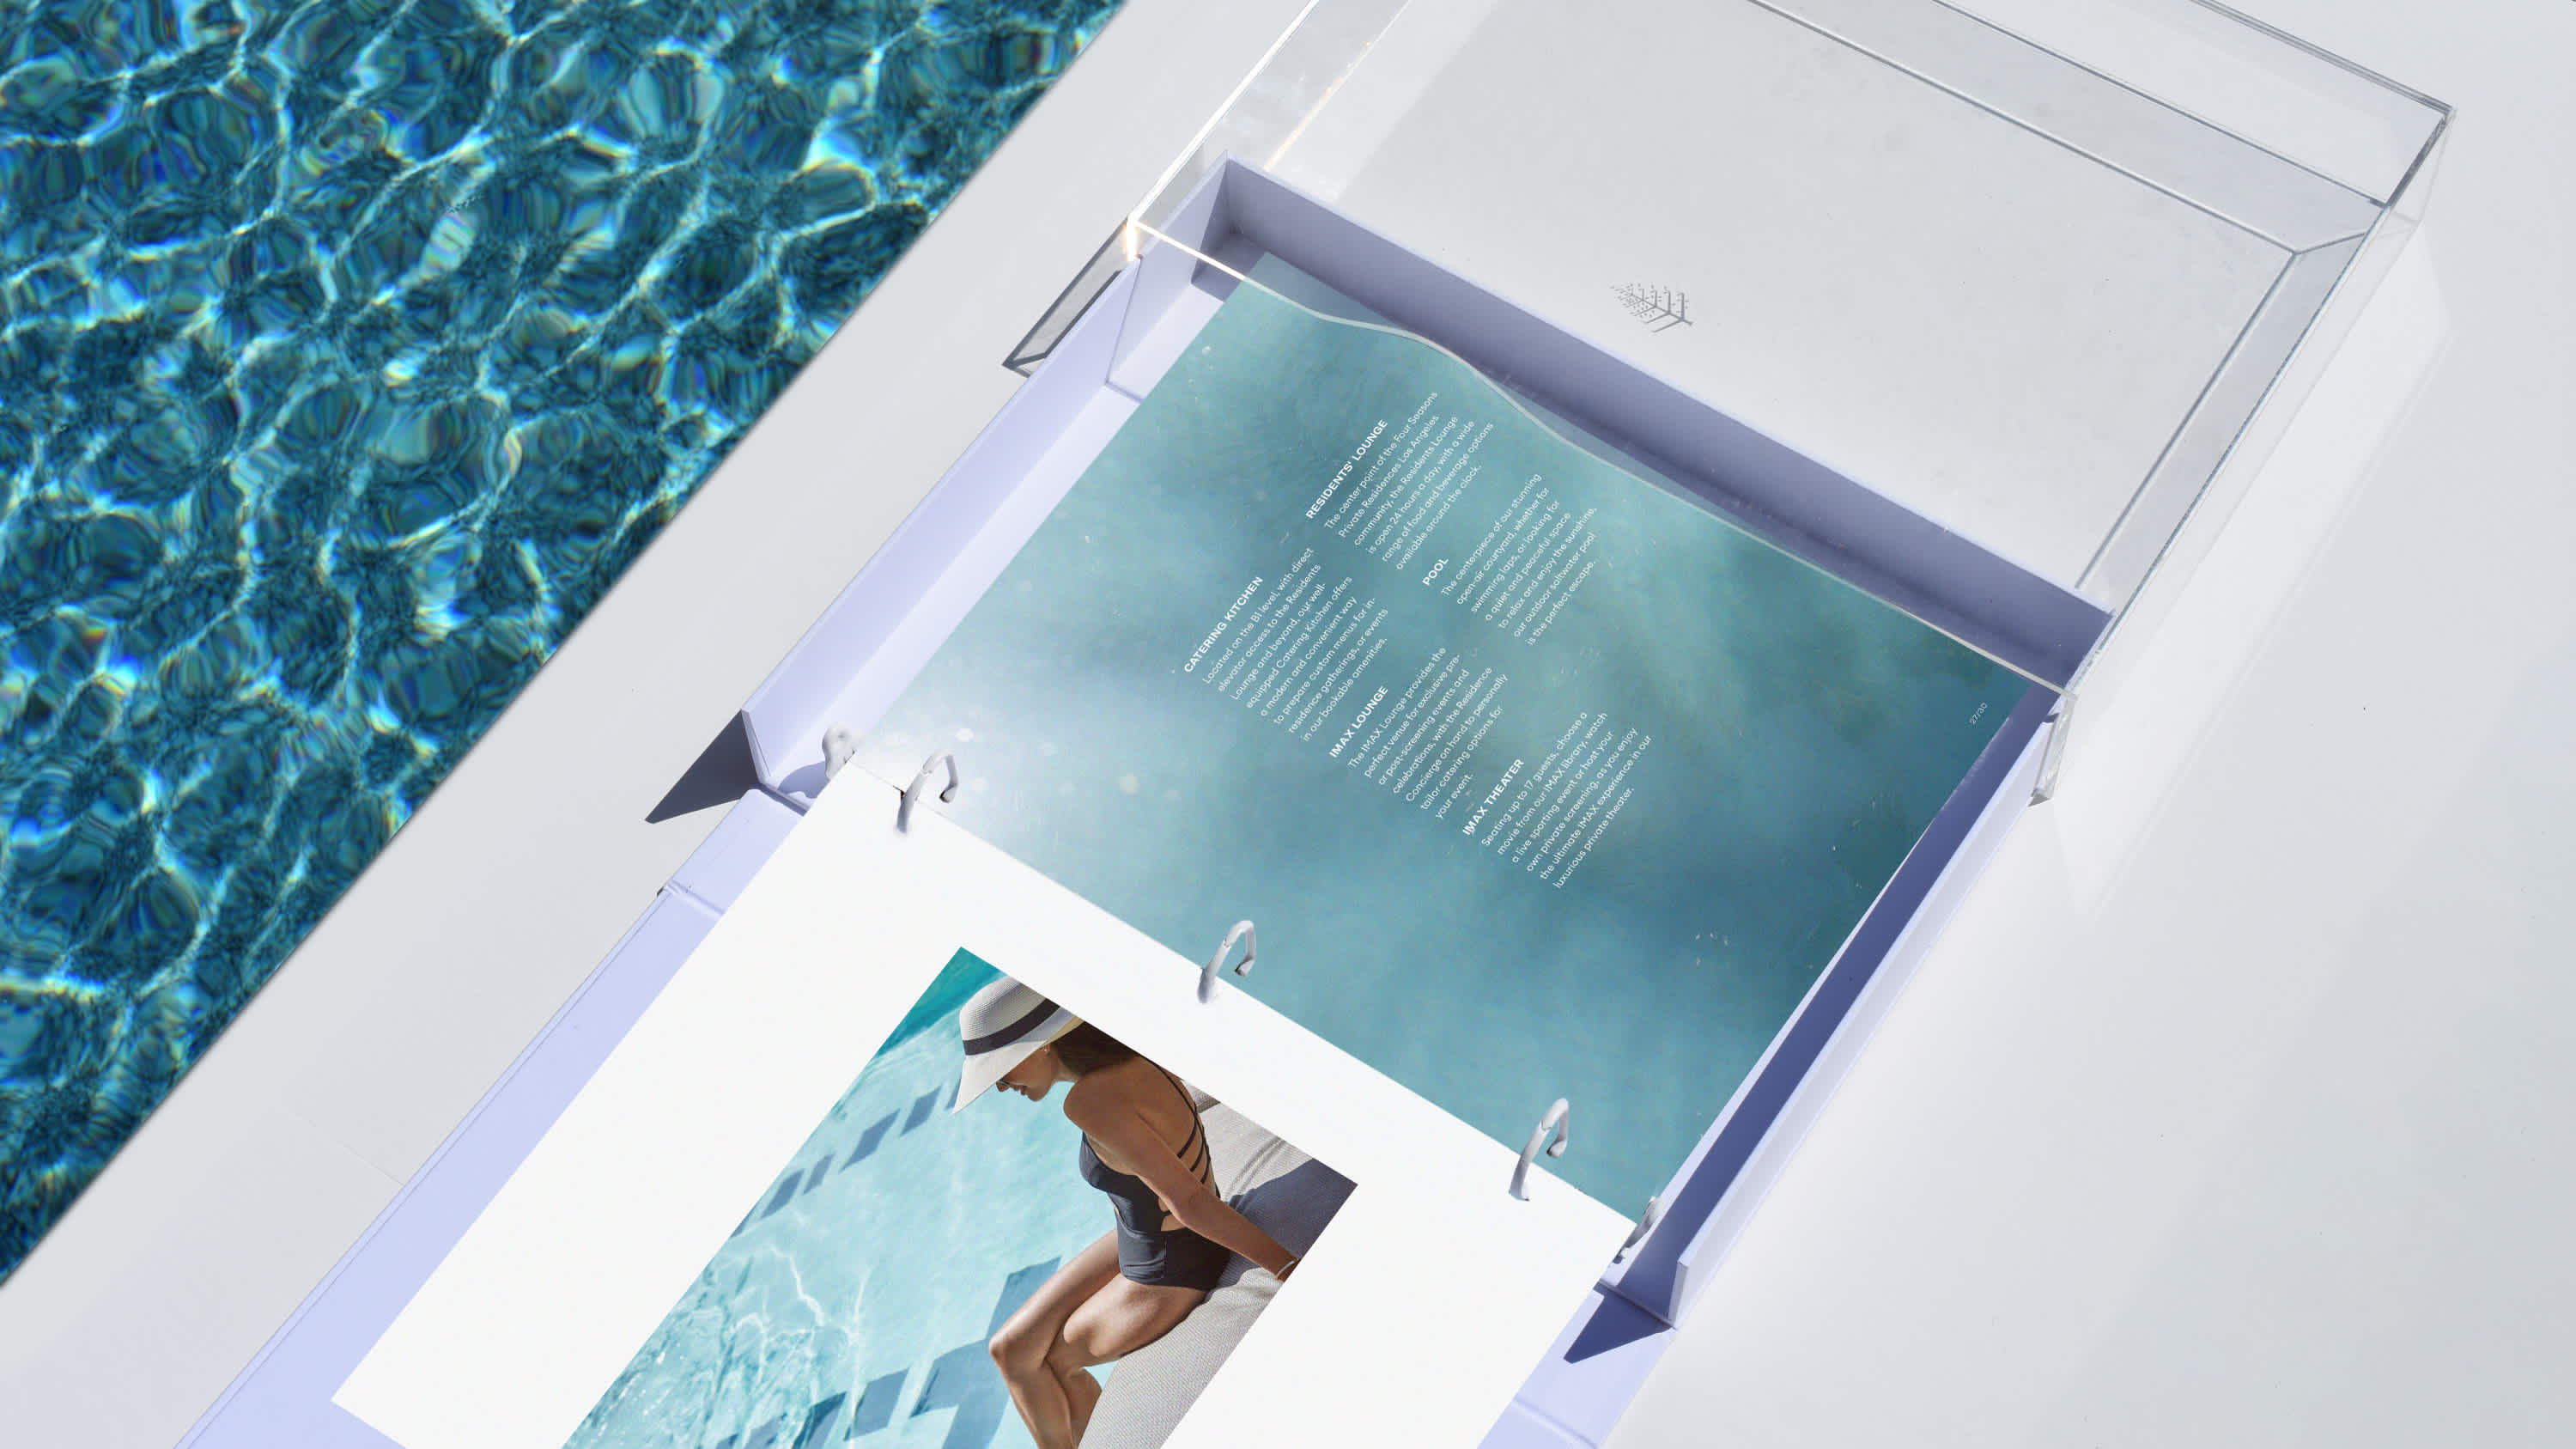 Dive into the essence of the Four Seasons Los Angeles with this visually stunning open compendium by the poolside. The contrast of crisp white pages against the ripple of azure waters captures a serene yet vibrant LA vibe, perfect for those who cherish luxury and relaxation.